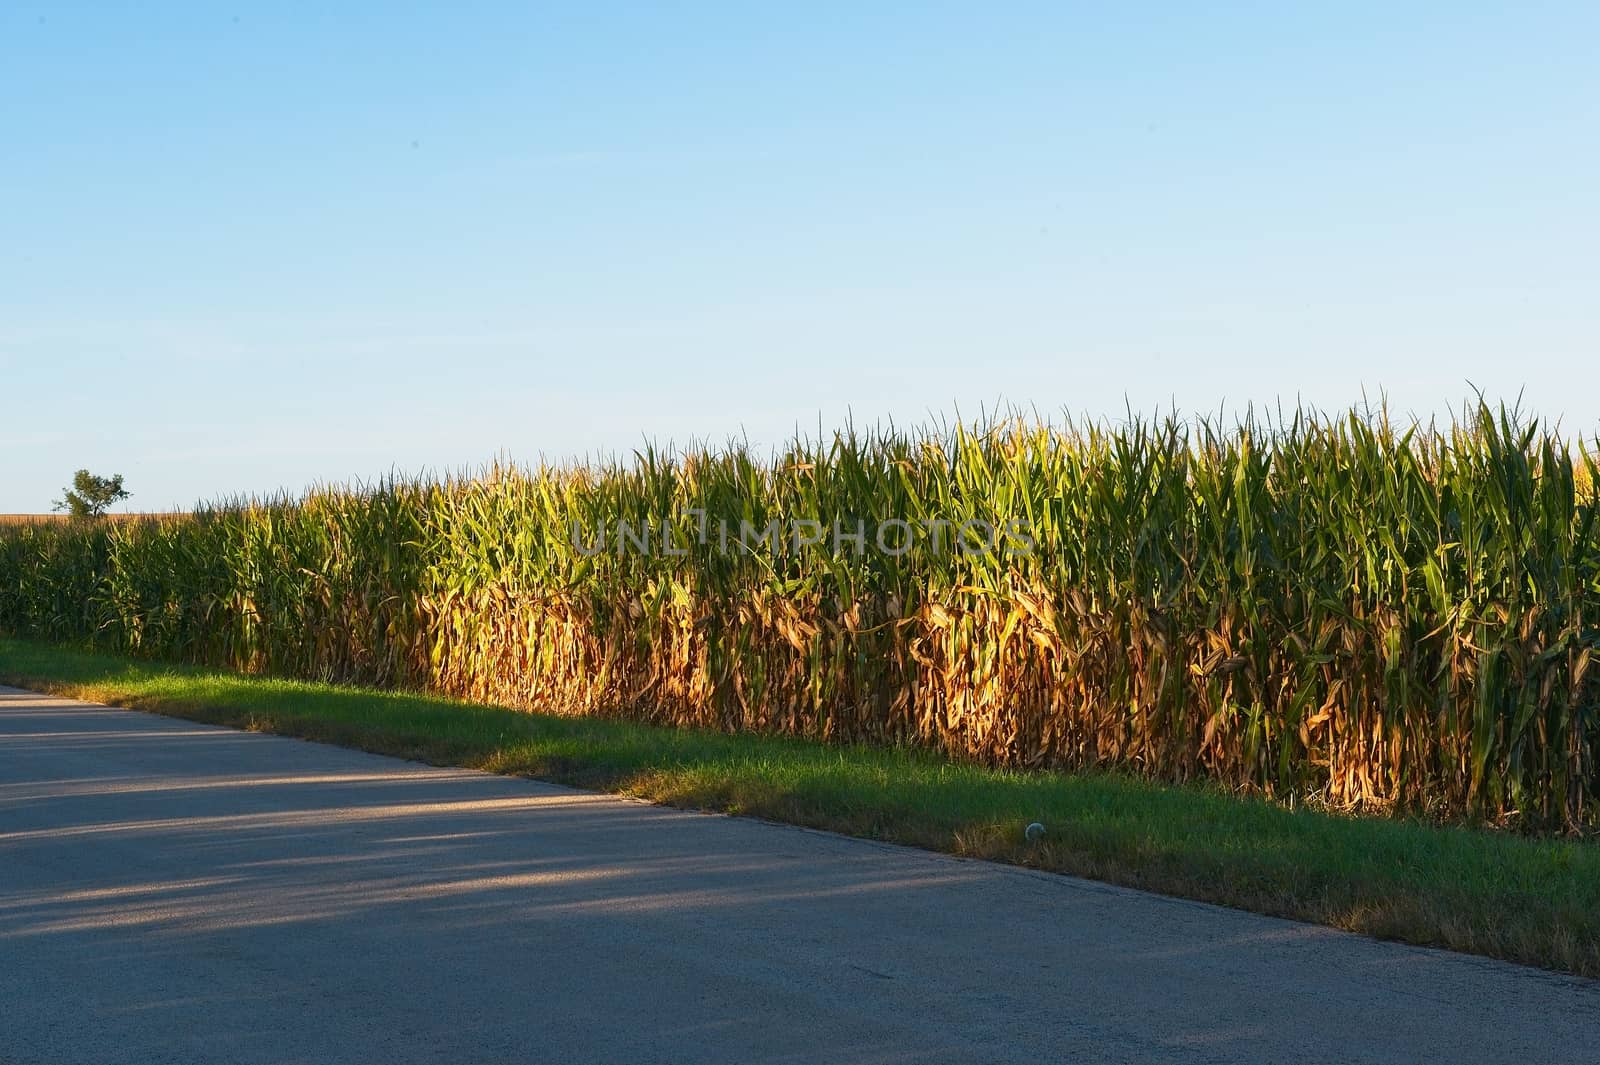 This is a corn crop along a rural road ripening for fall harvest.